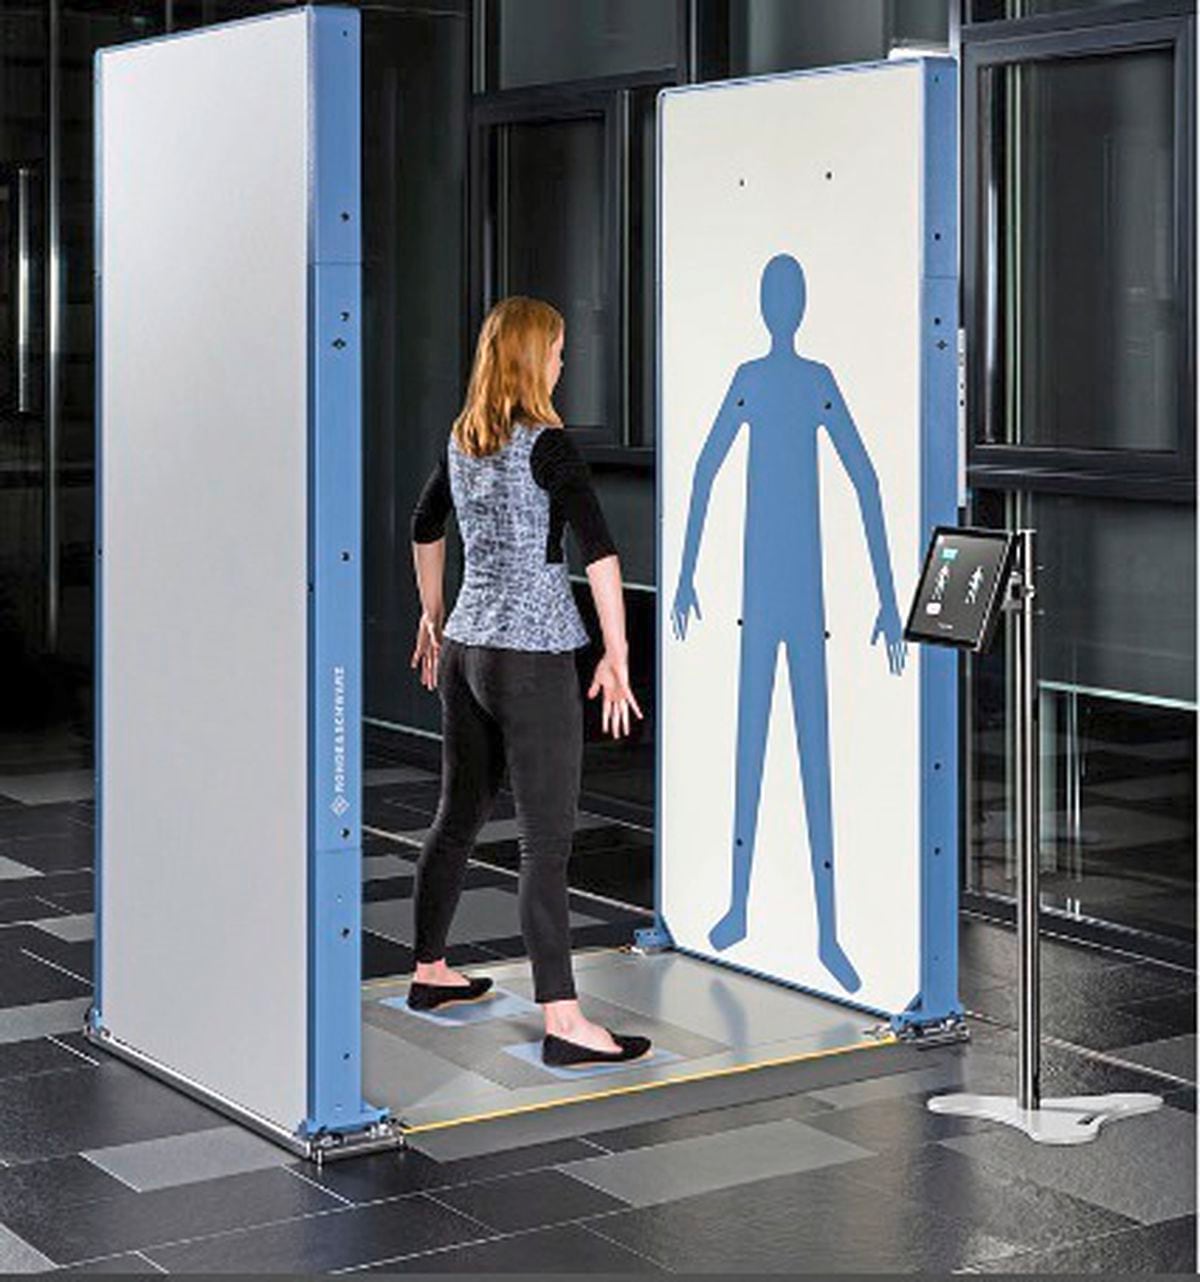 airport body scanner software download